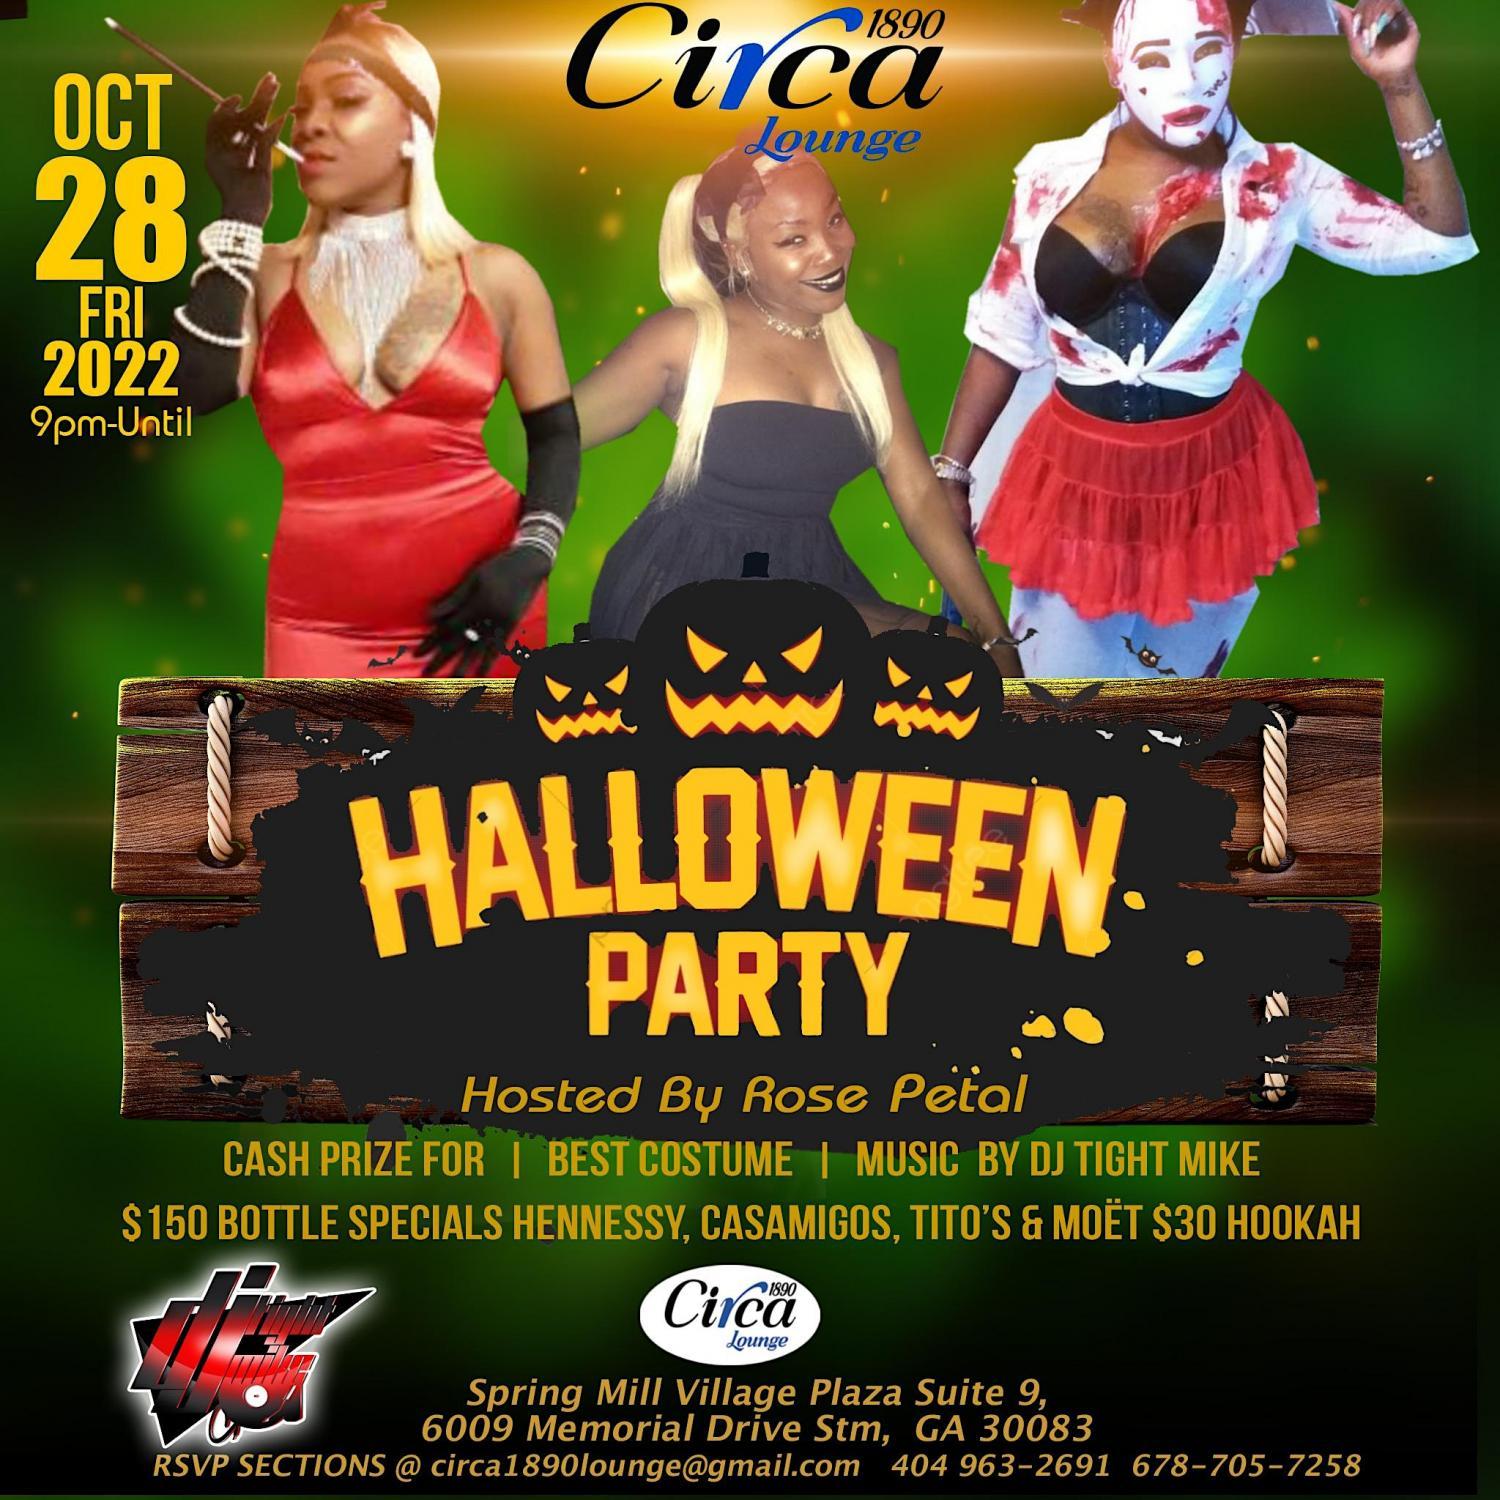 Halloween Party Hosted By Rose Petal
Fri Oct 28, 7:00 PM - Sat Oct 29, 2:30 AM
in 8 days